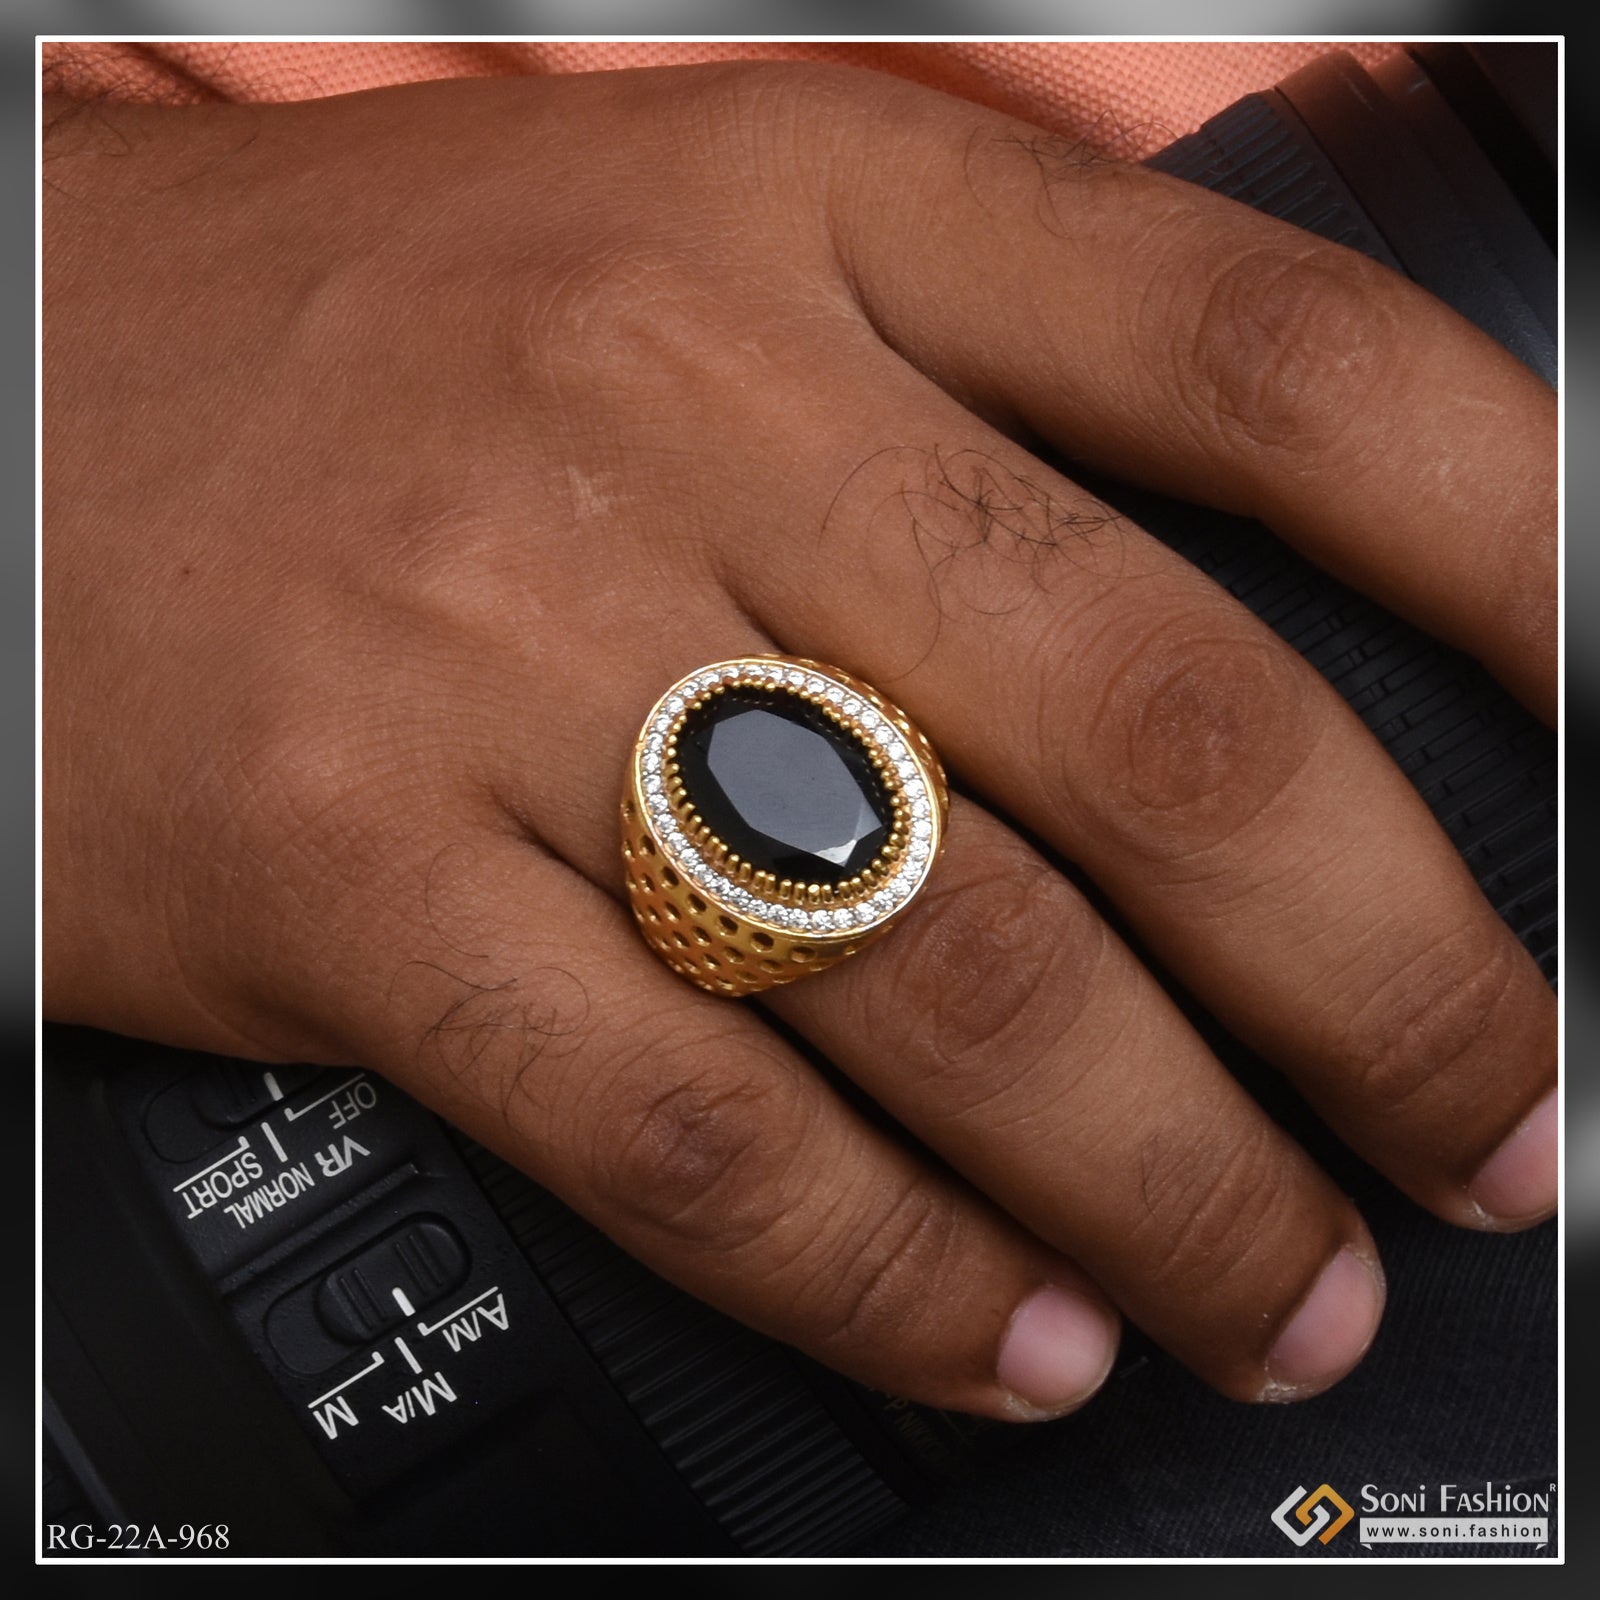 1 Gram Gold Forming Black Stone with Diamond Best Quality Ring - Style A968